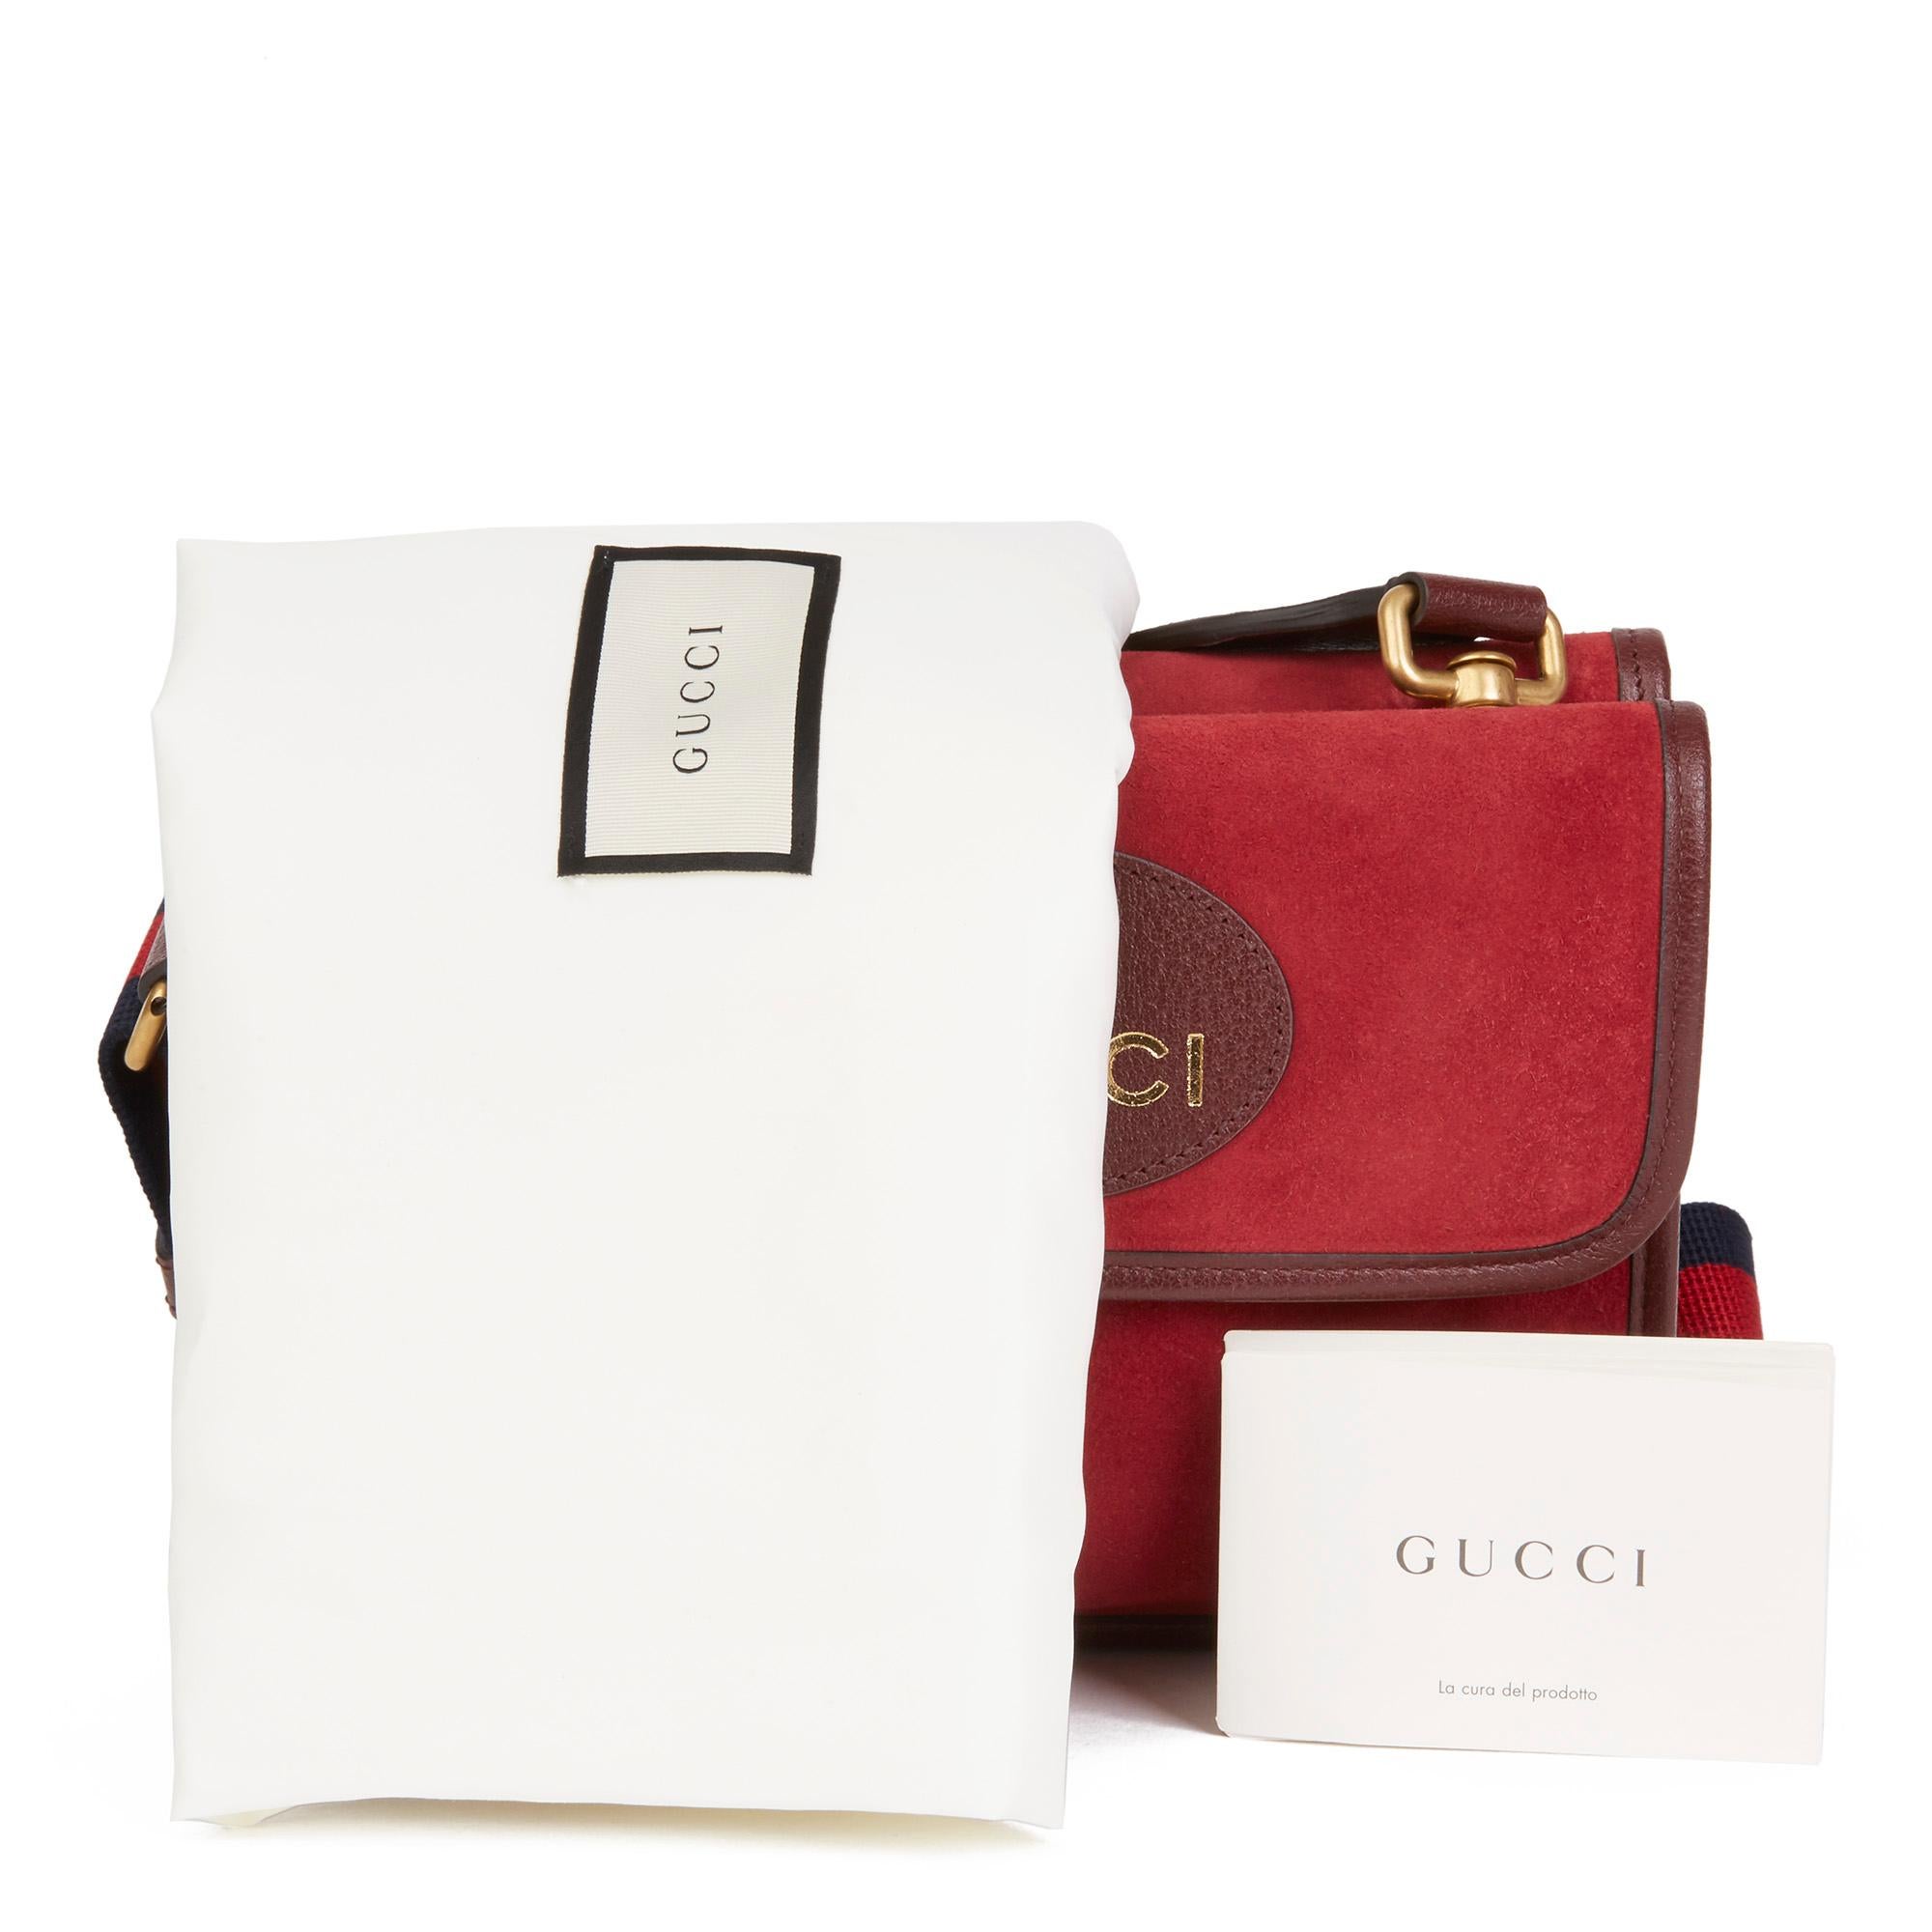 2020 Gucci Red Suede & Burgundy Pigskin, Navy Web Small Messenger Bag 7